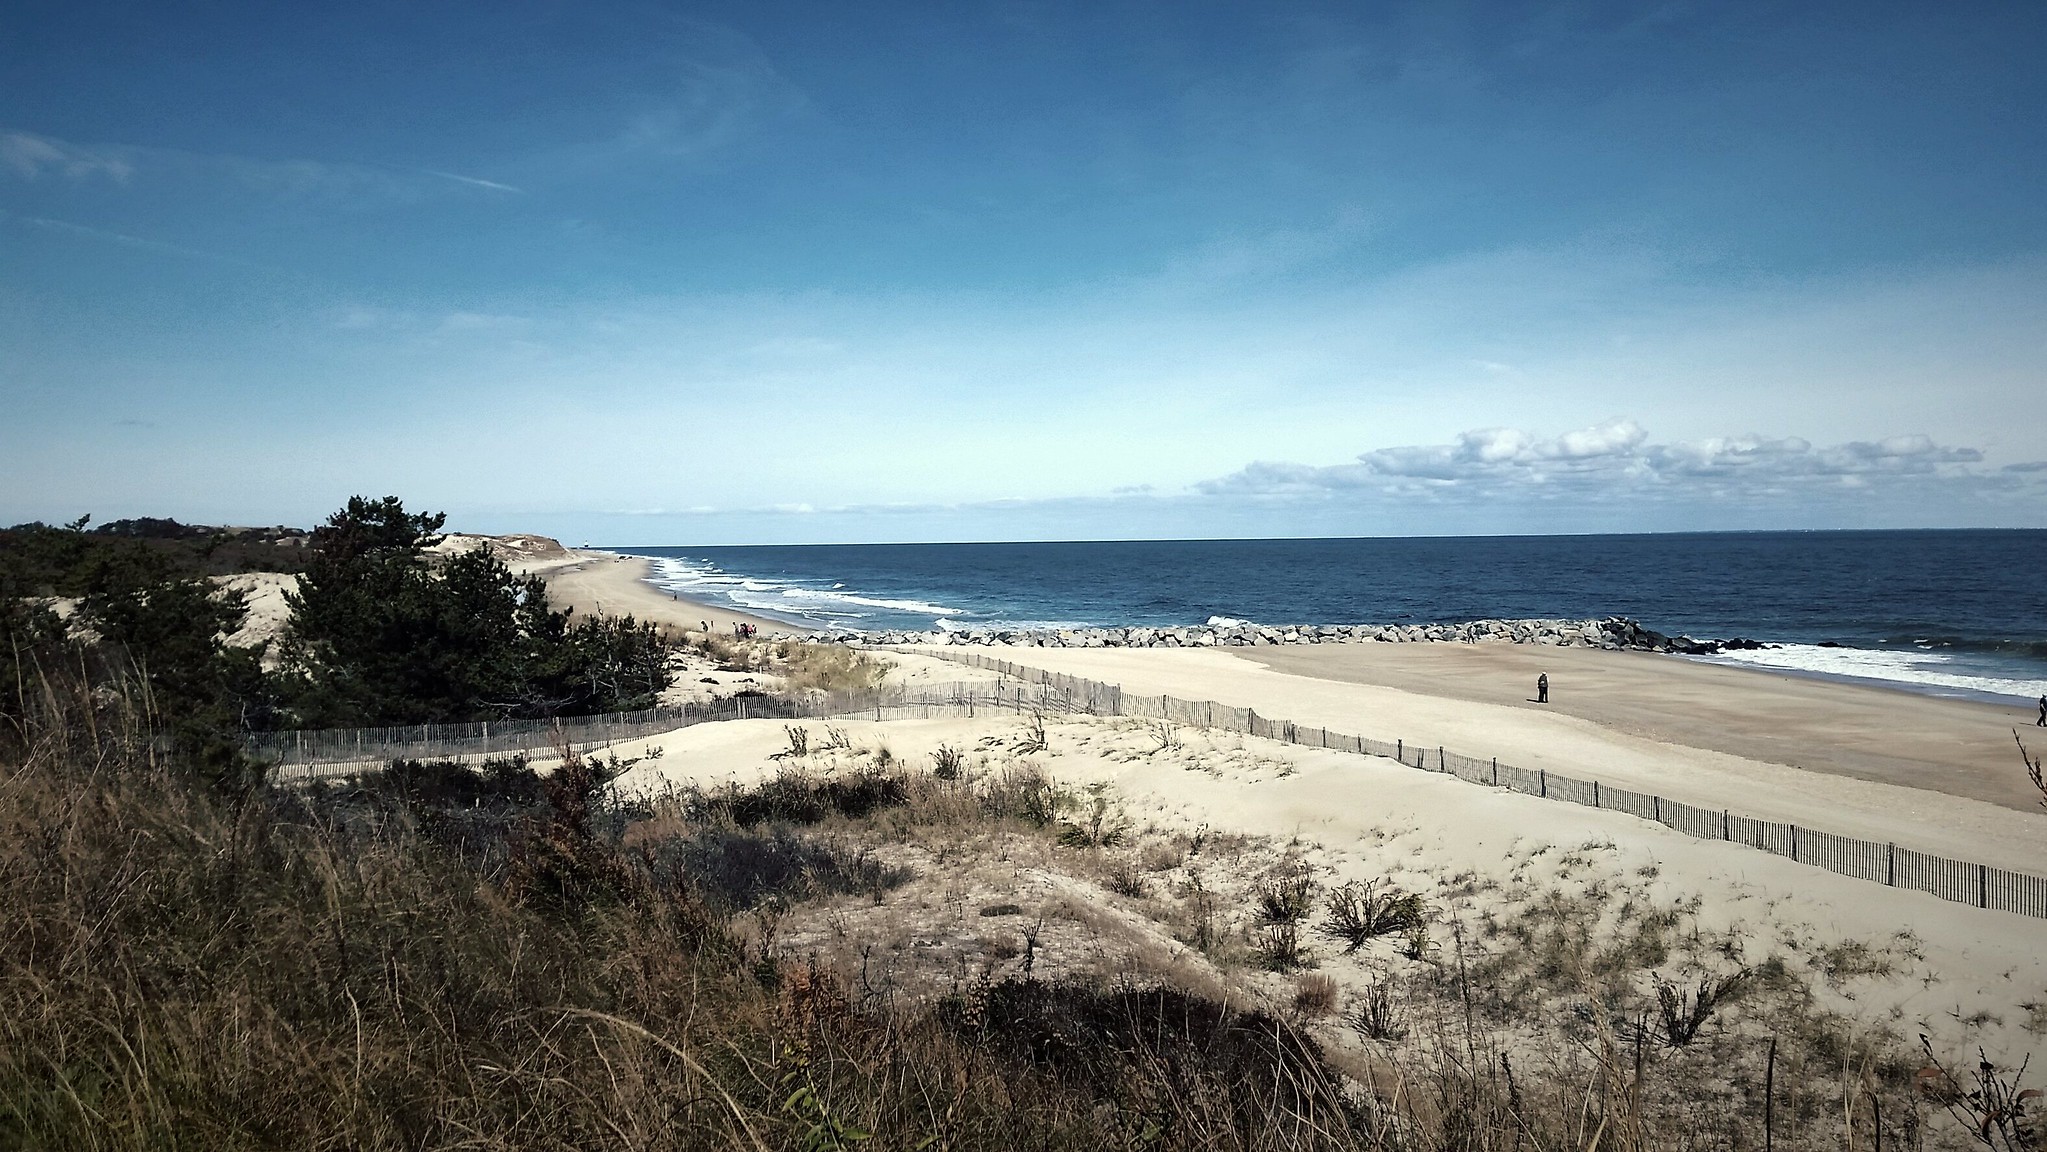 Looking north along the Atlantic Ocean beach at Cape Henlopen State Park.